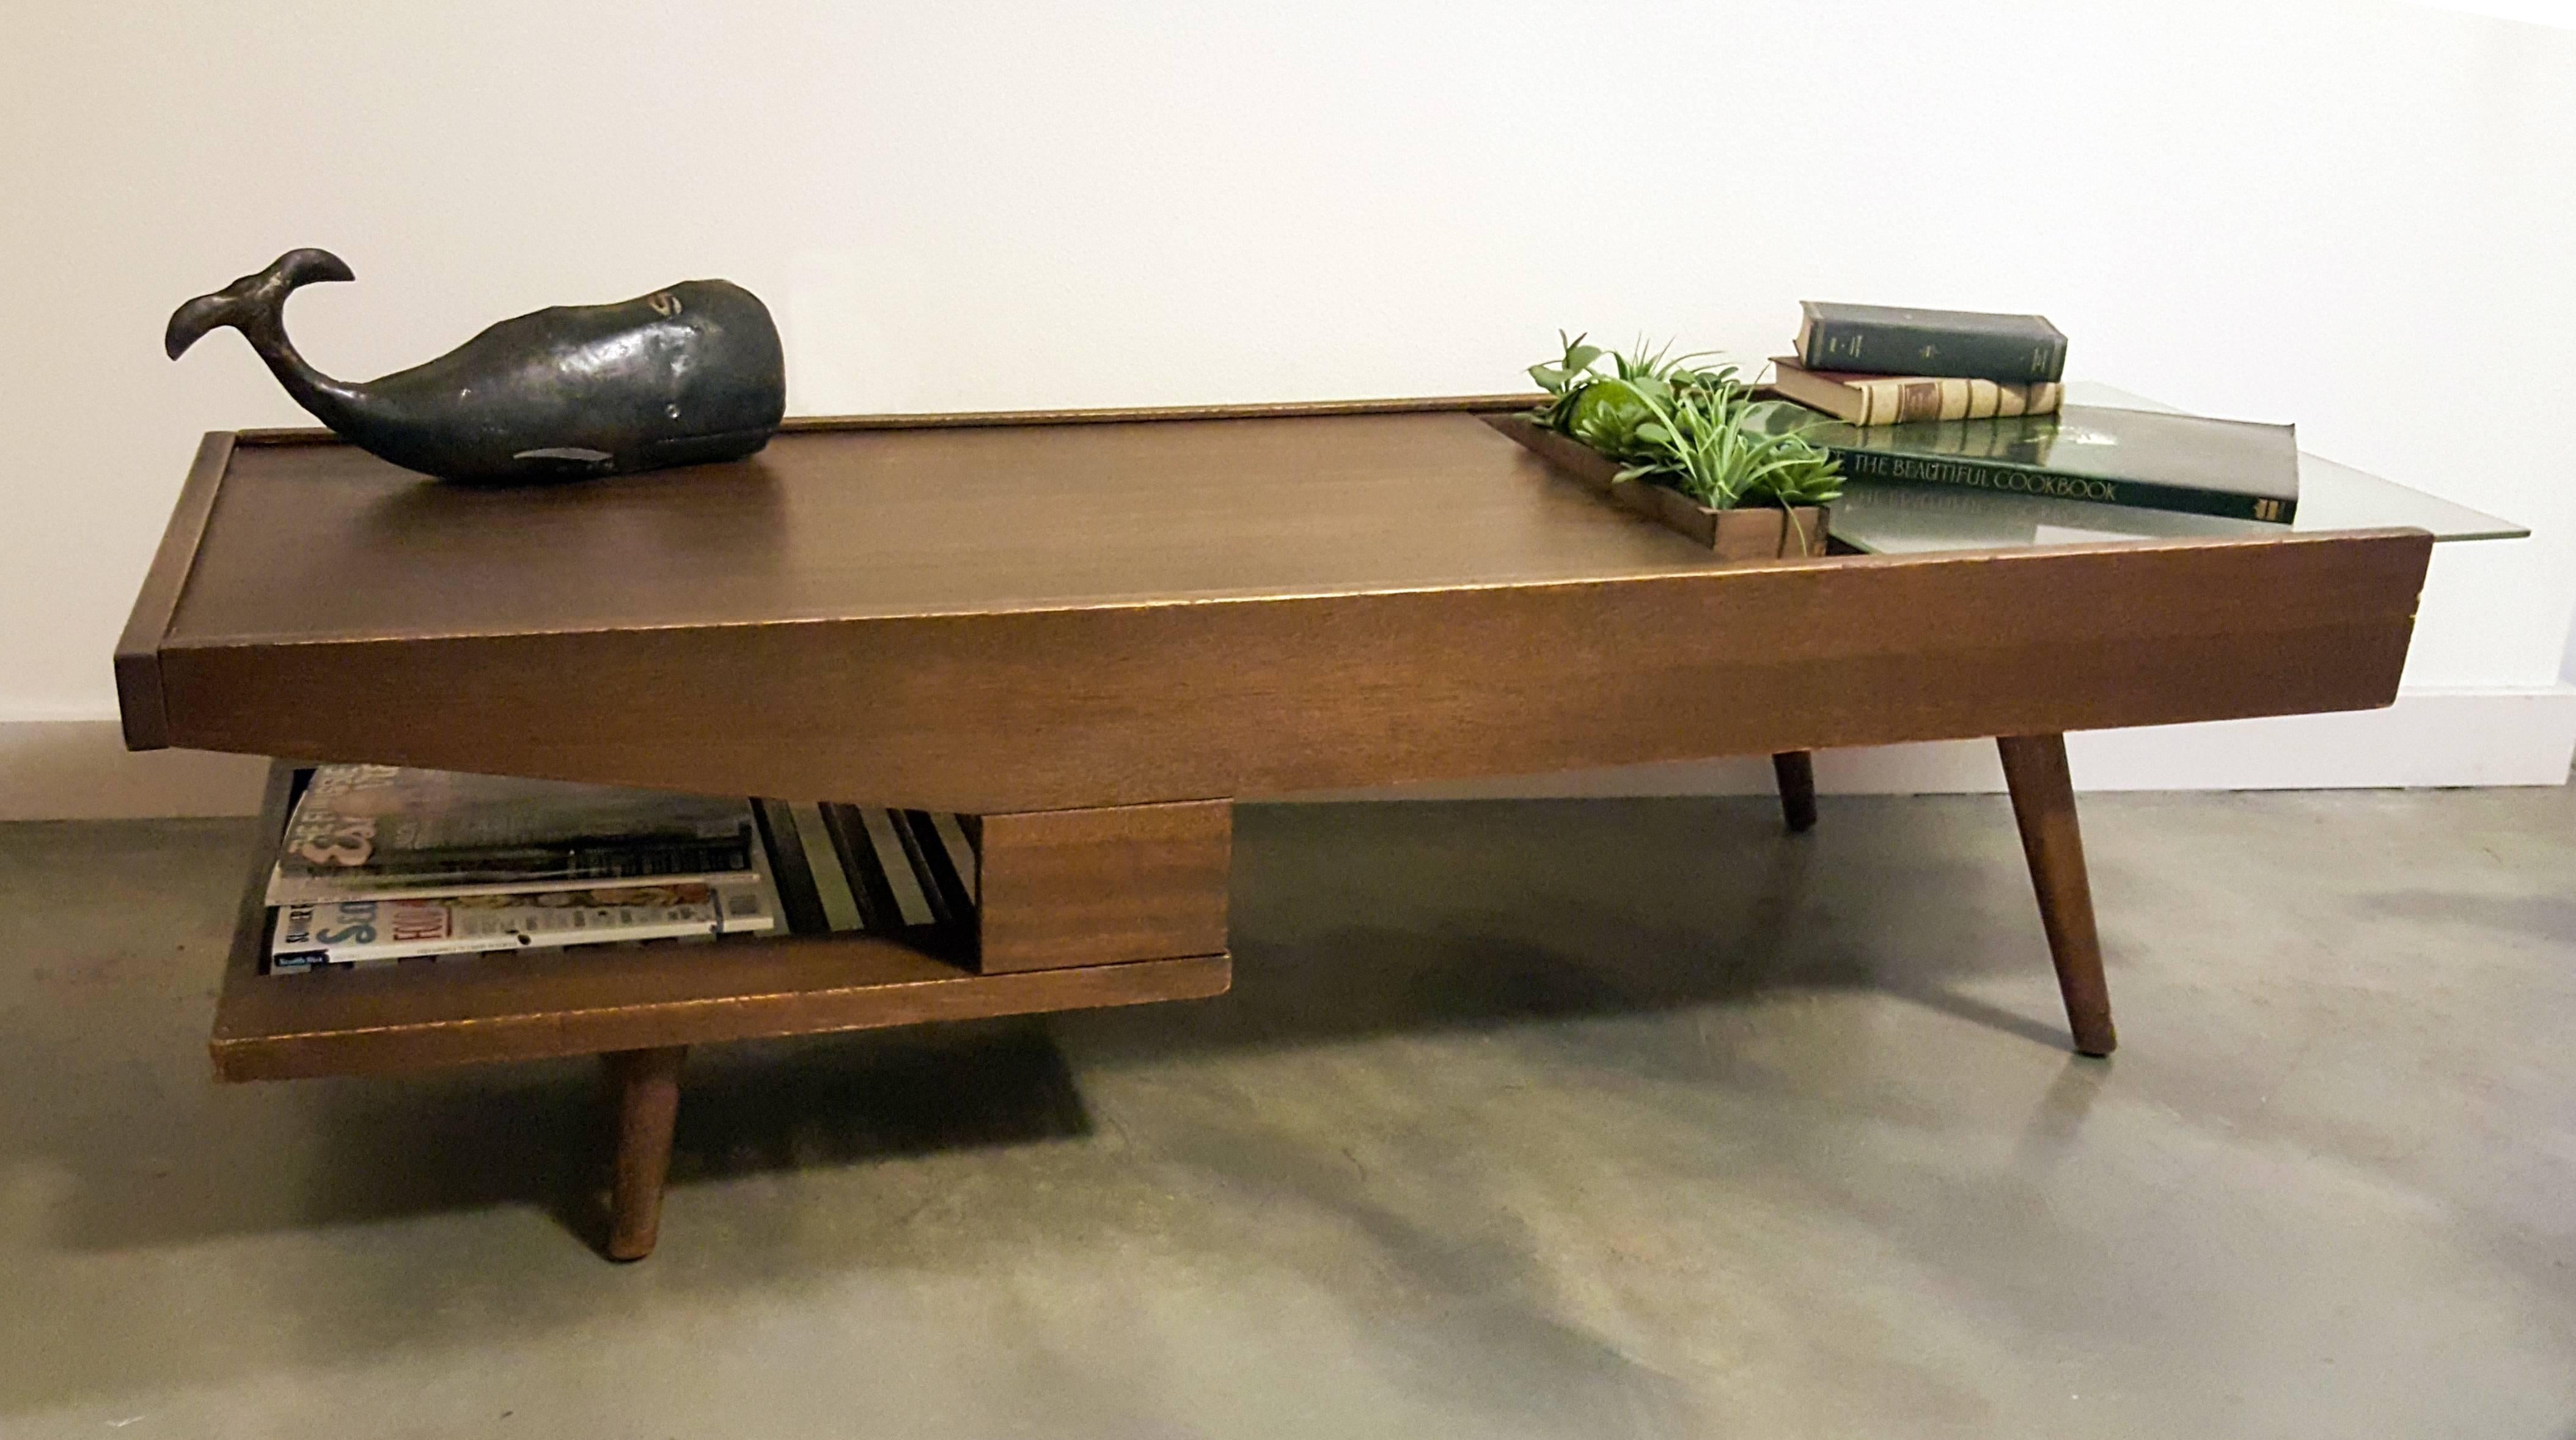 A stunning, rare John Keal for brown and saltman coffee table that features a built in bar as well as a magazine rack. The coffee table has been refinished and stained in a satin walnut.